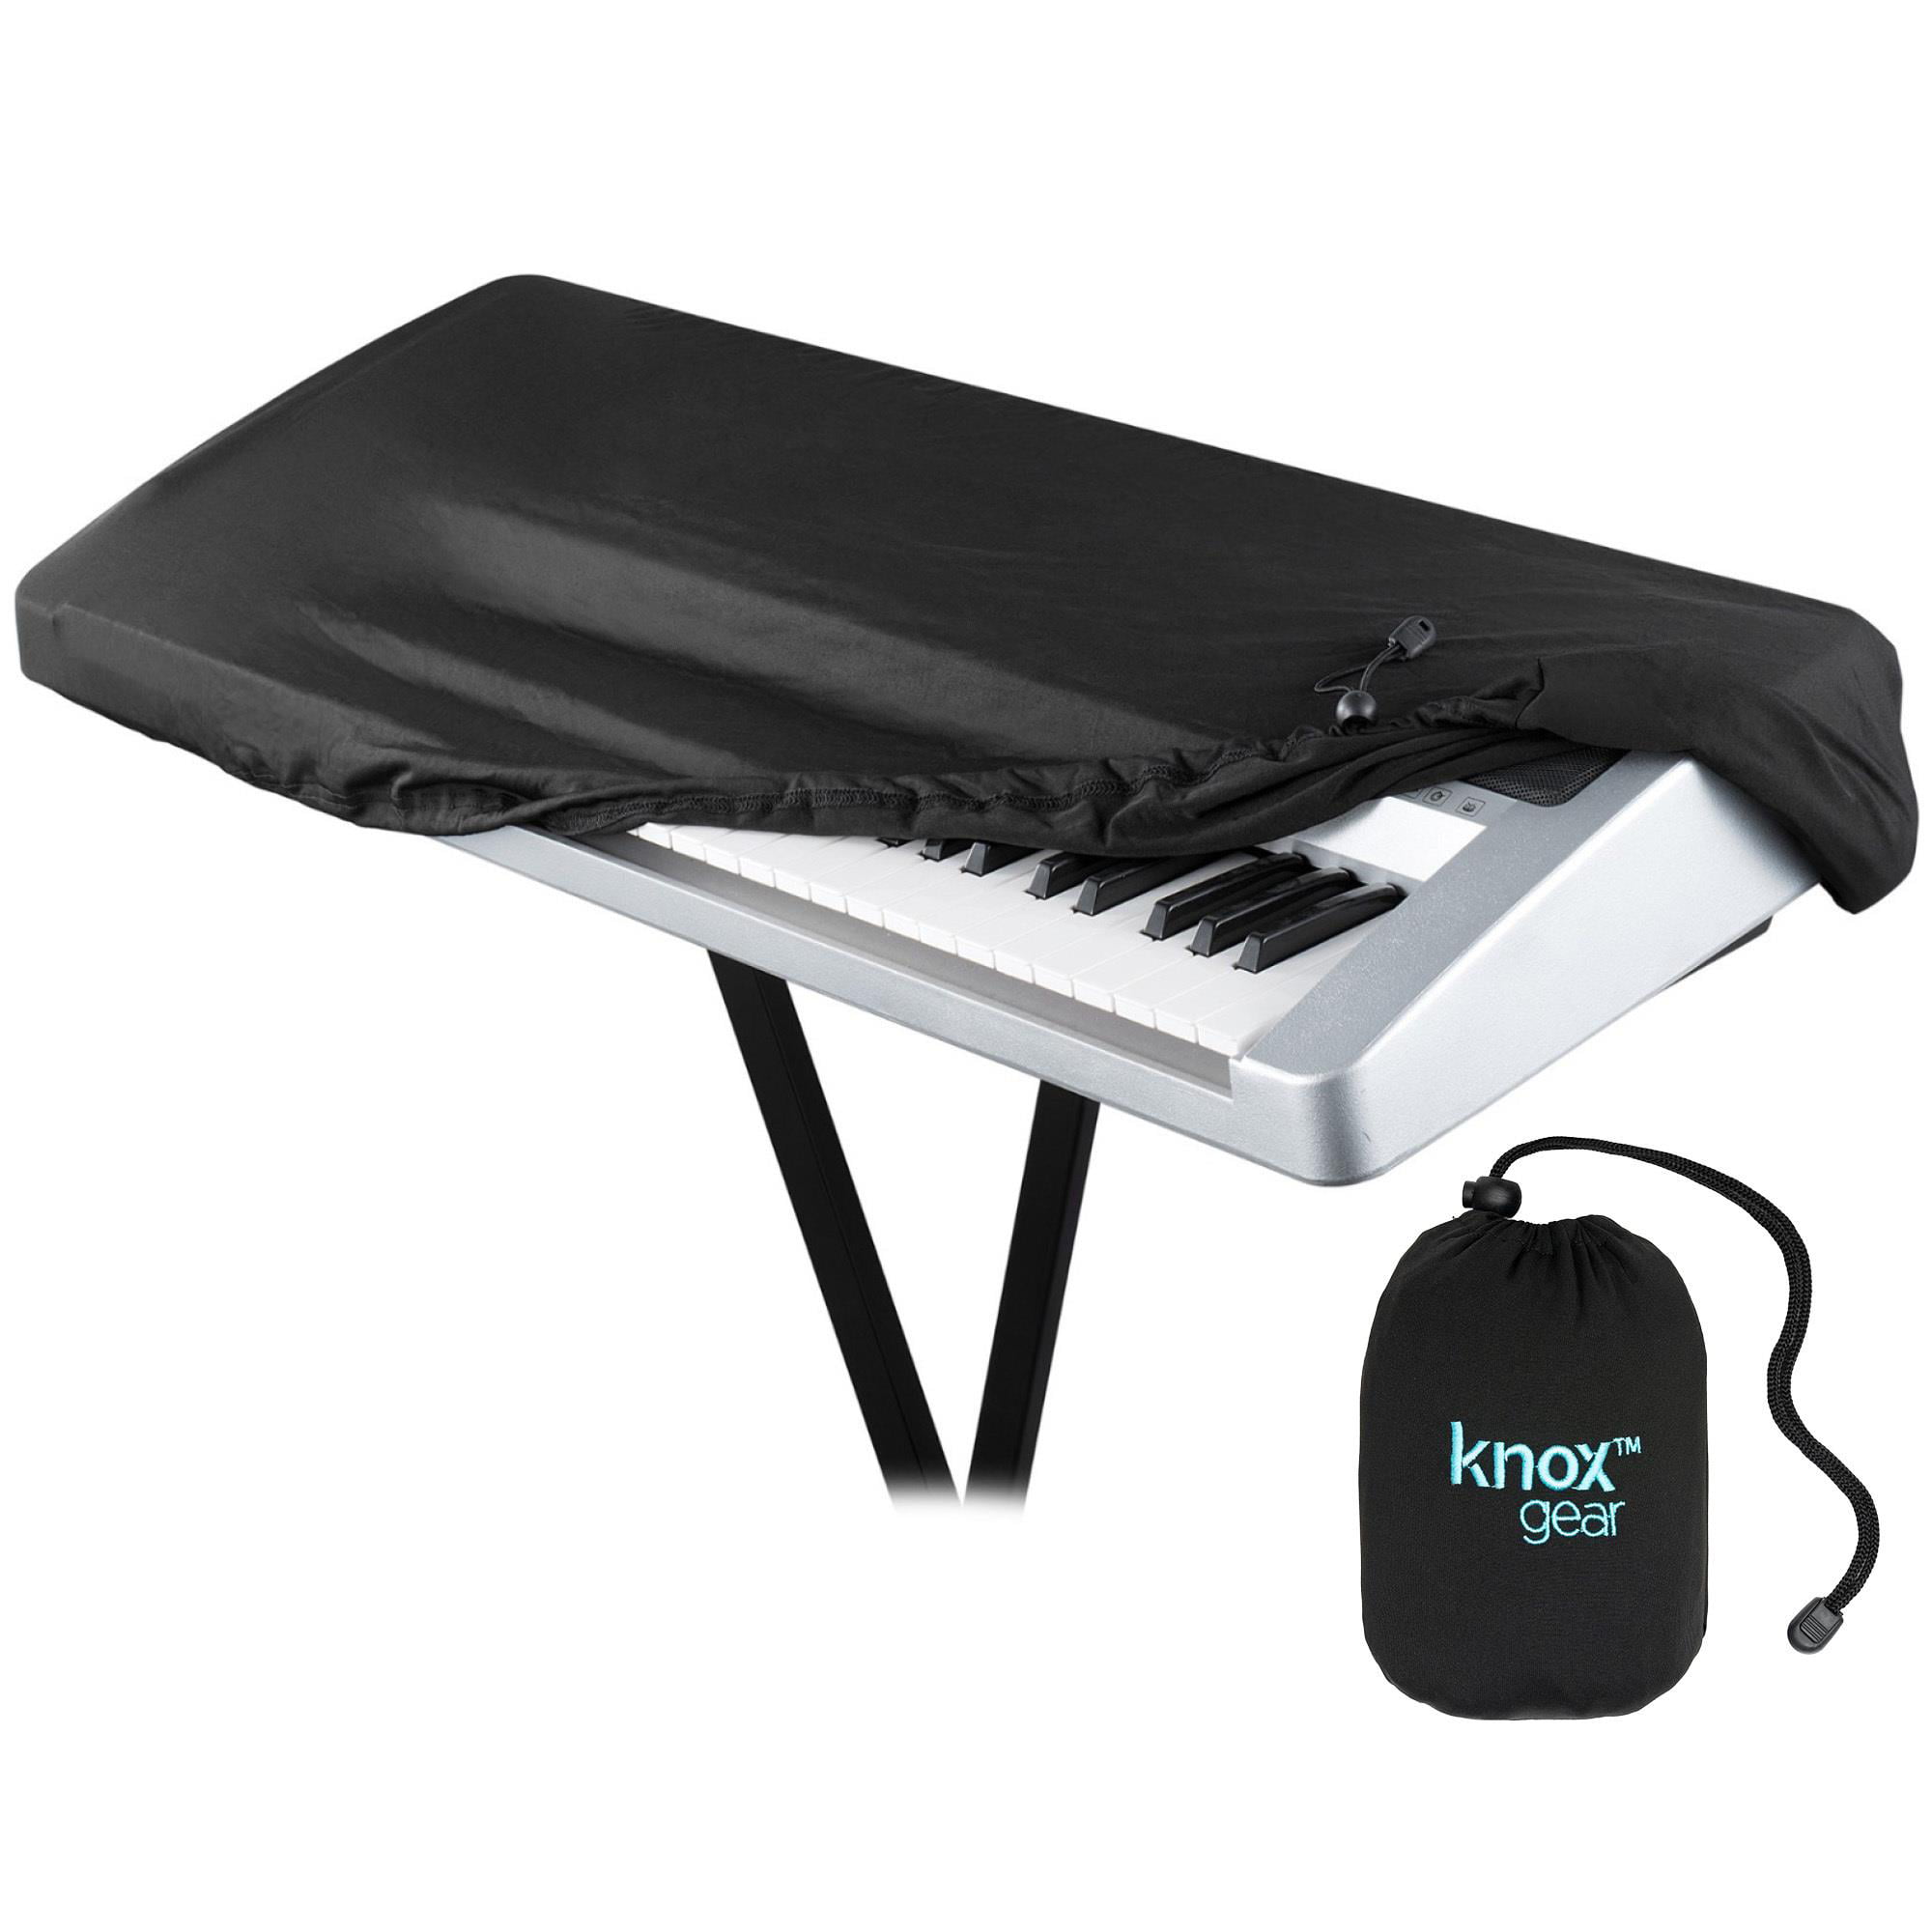 Keyboard Cover,76 Keys Electronic Piano Keyboard Dust Cover Black Soft Cloth Anti-Dust Protector Washable